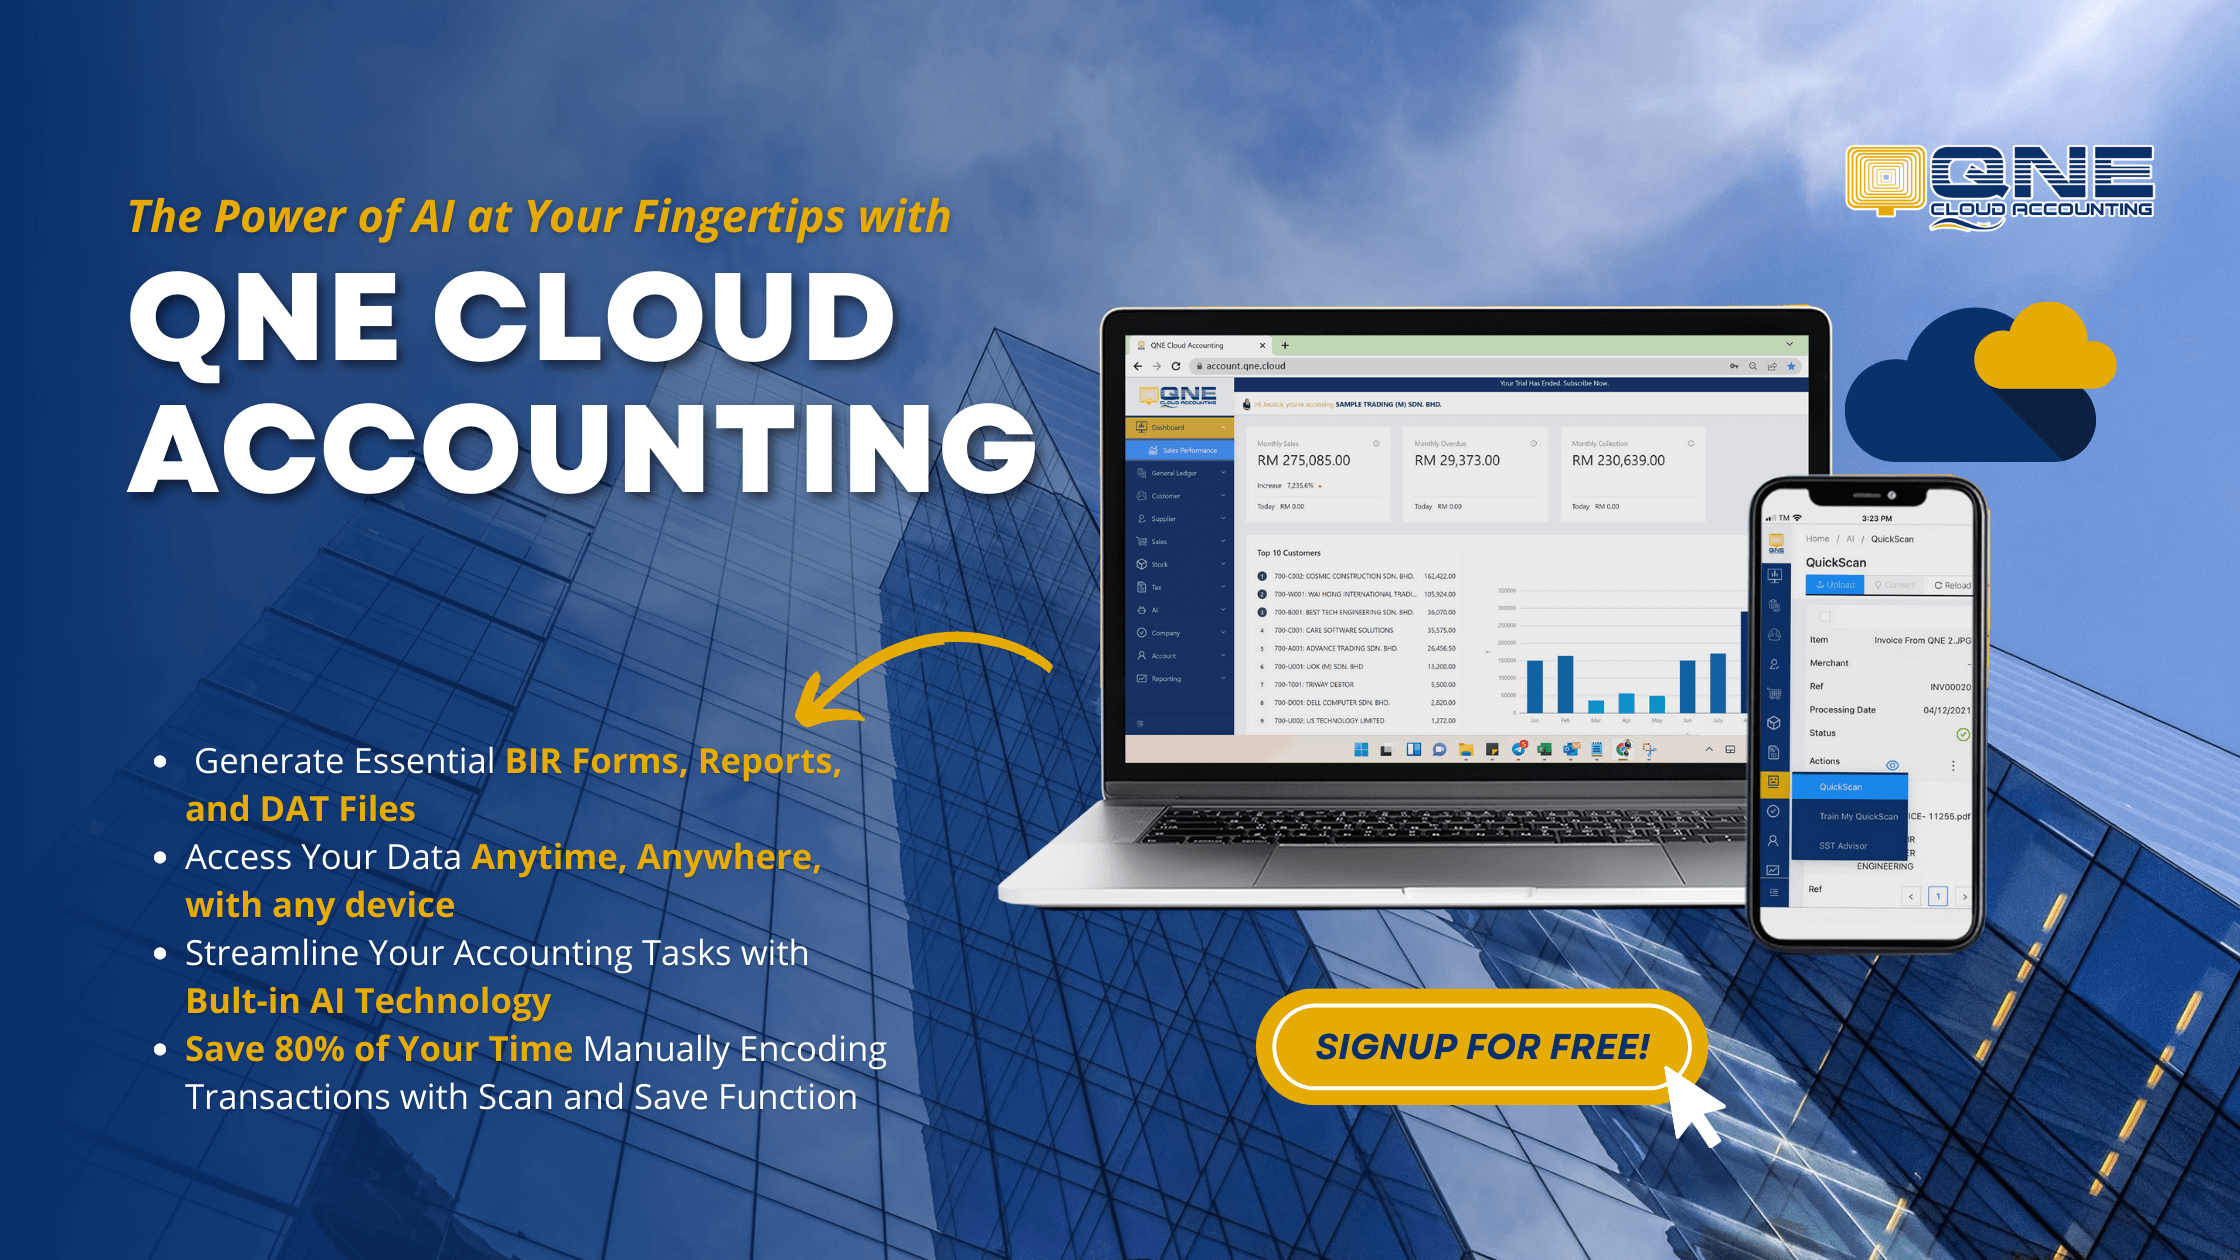 Why Use Cloud Accounting